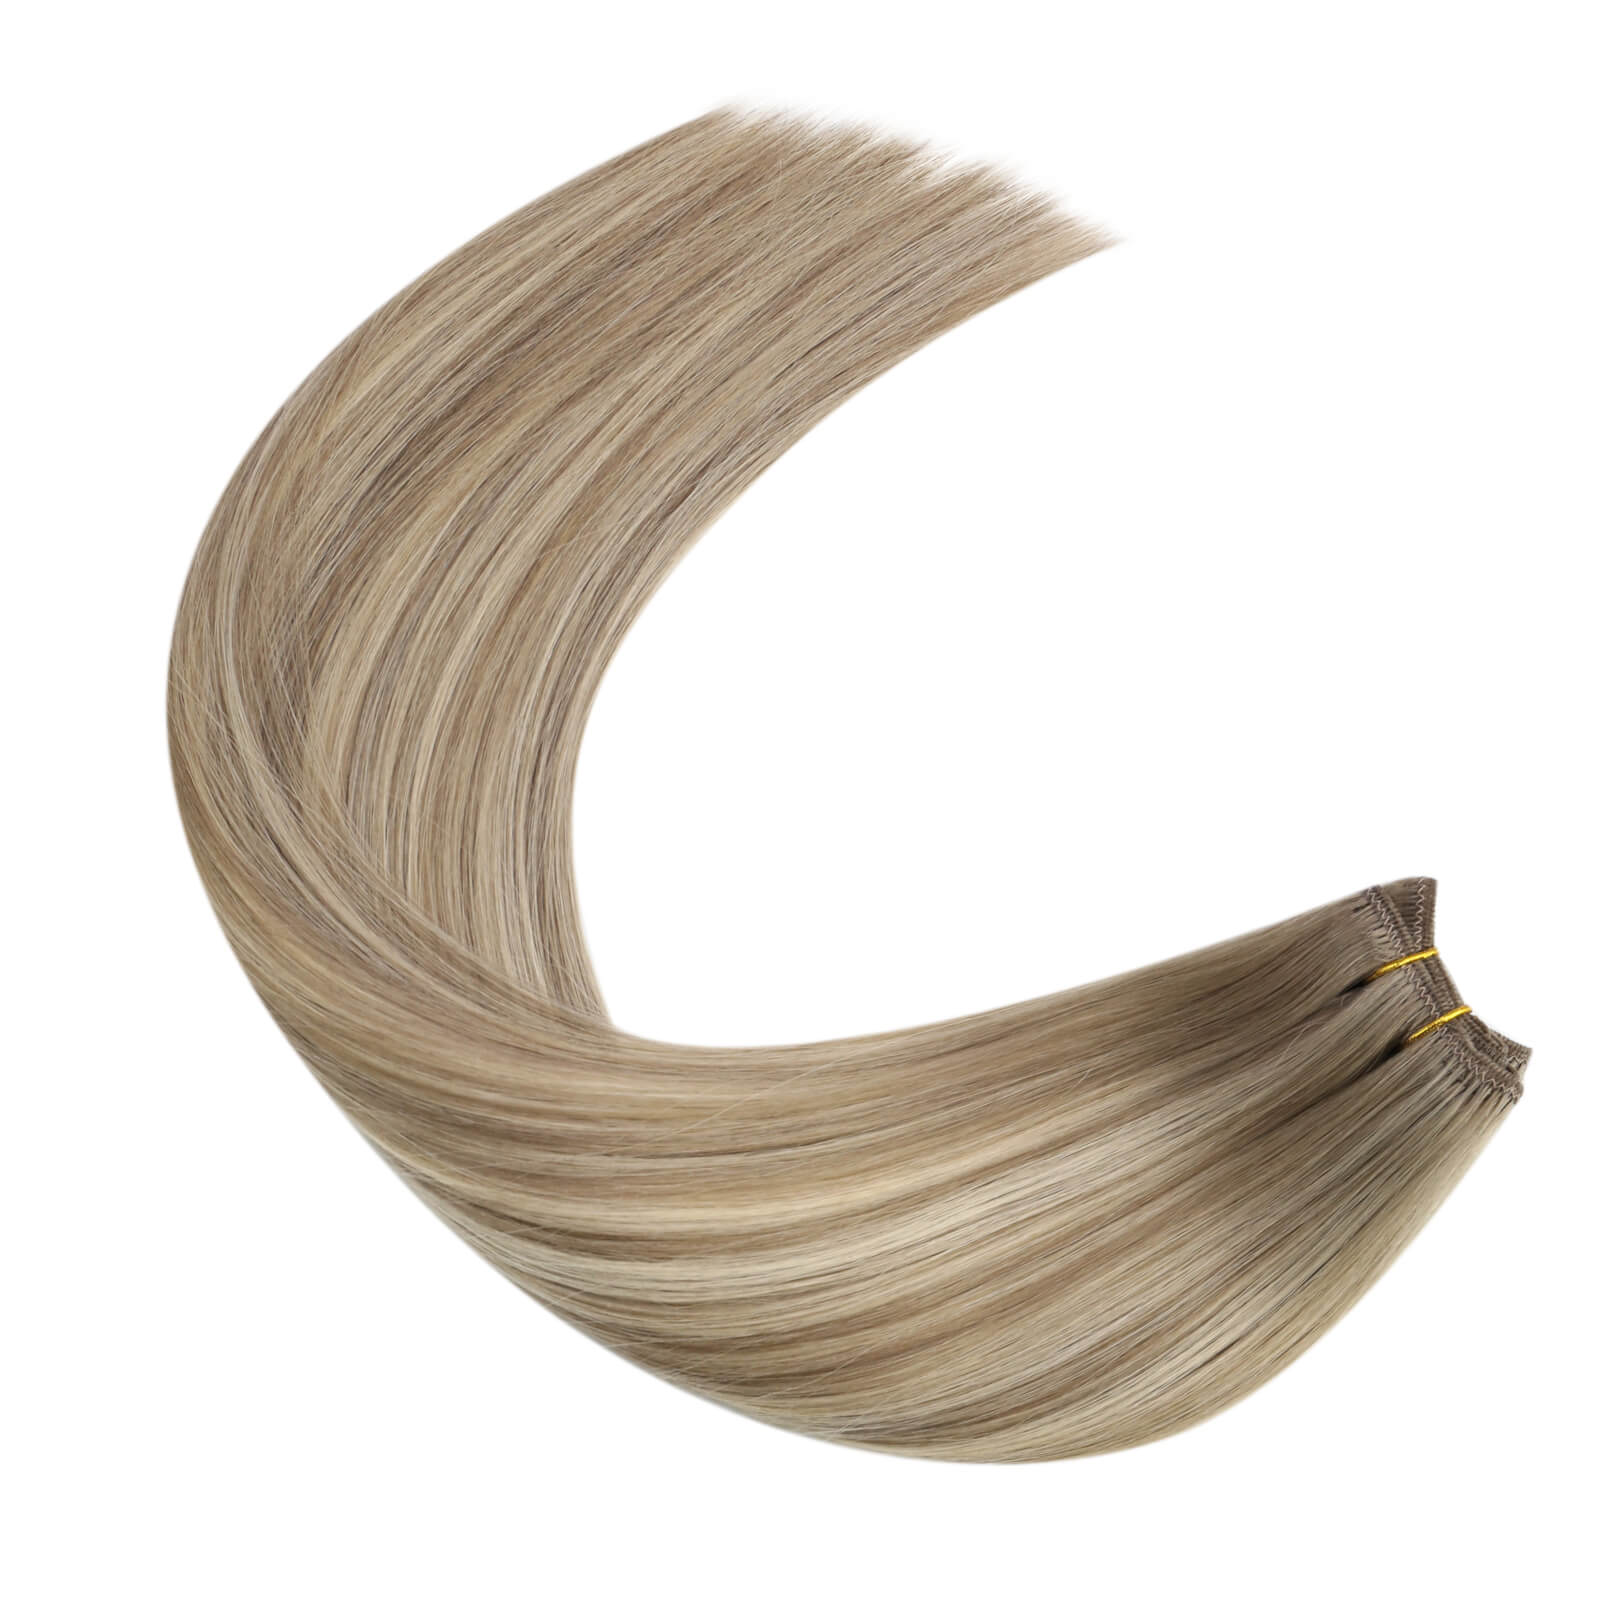 human hair extensions sew in hair weft wholesale human hair extensions